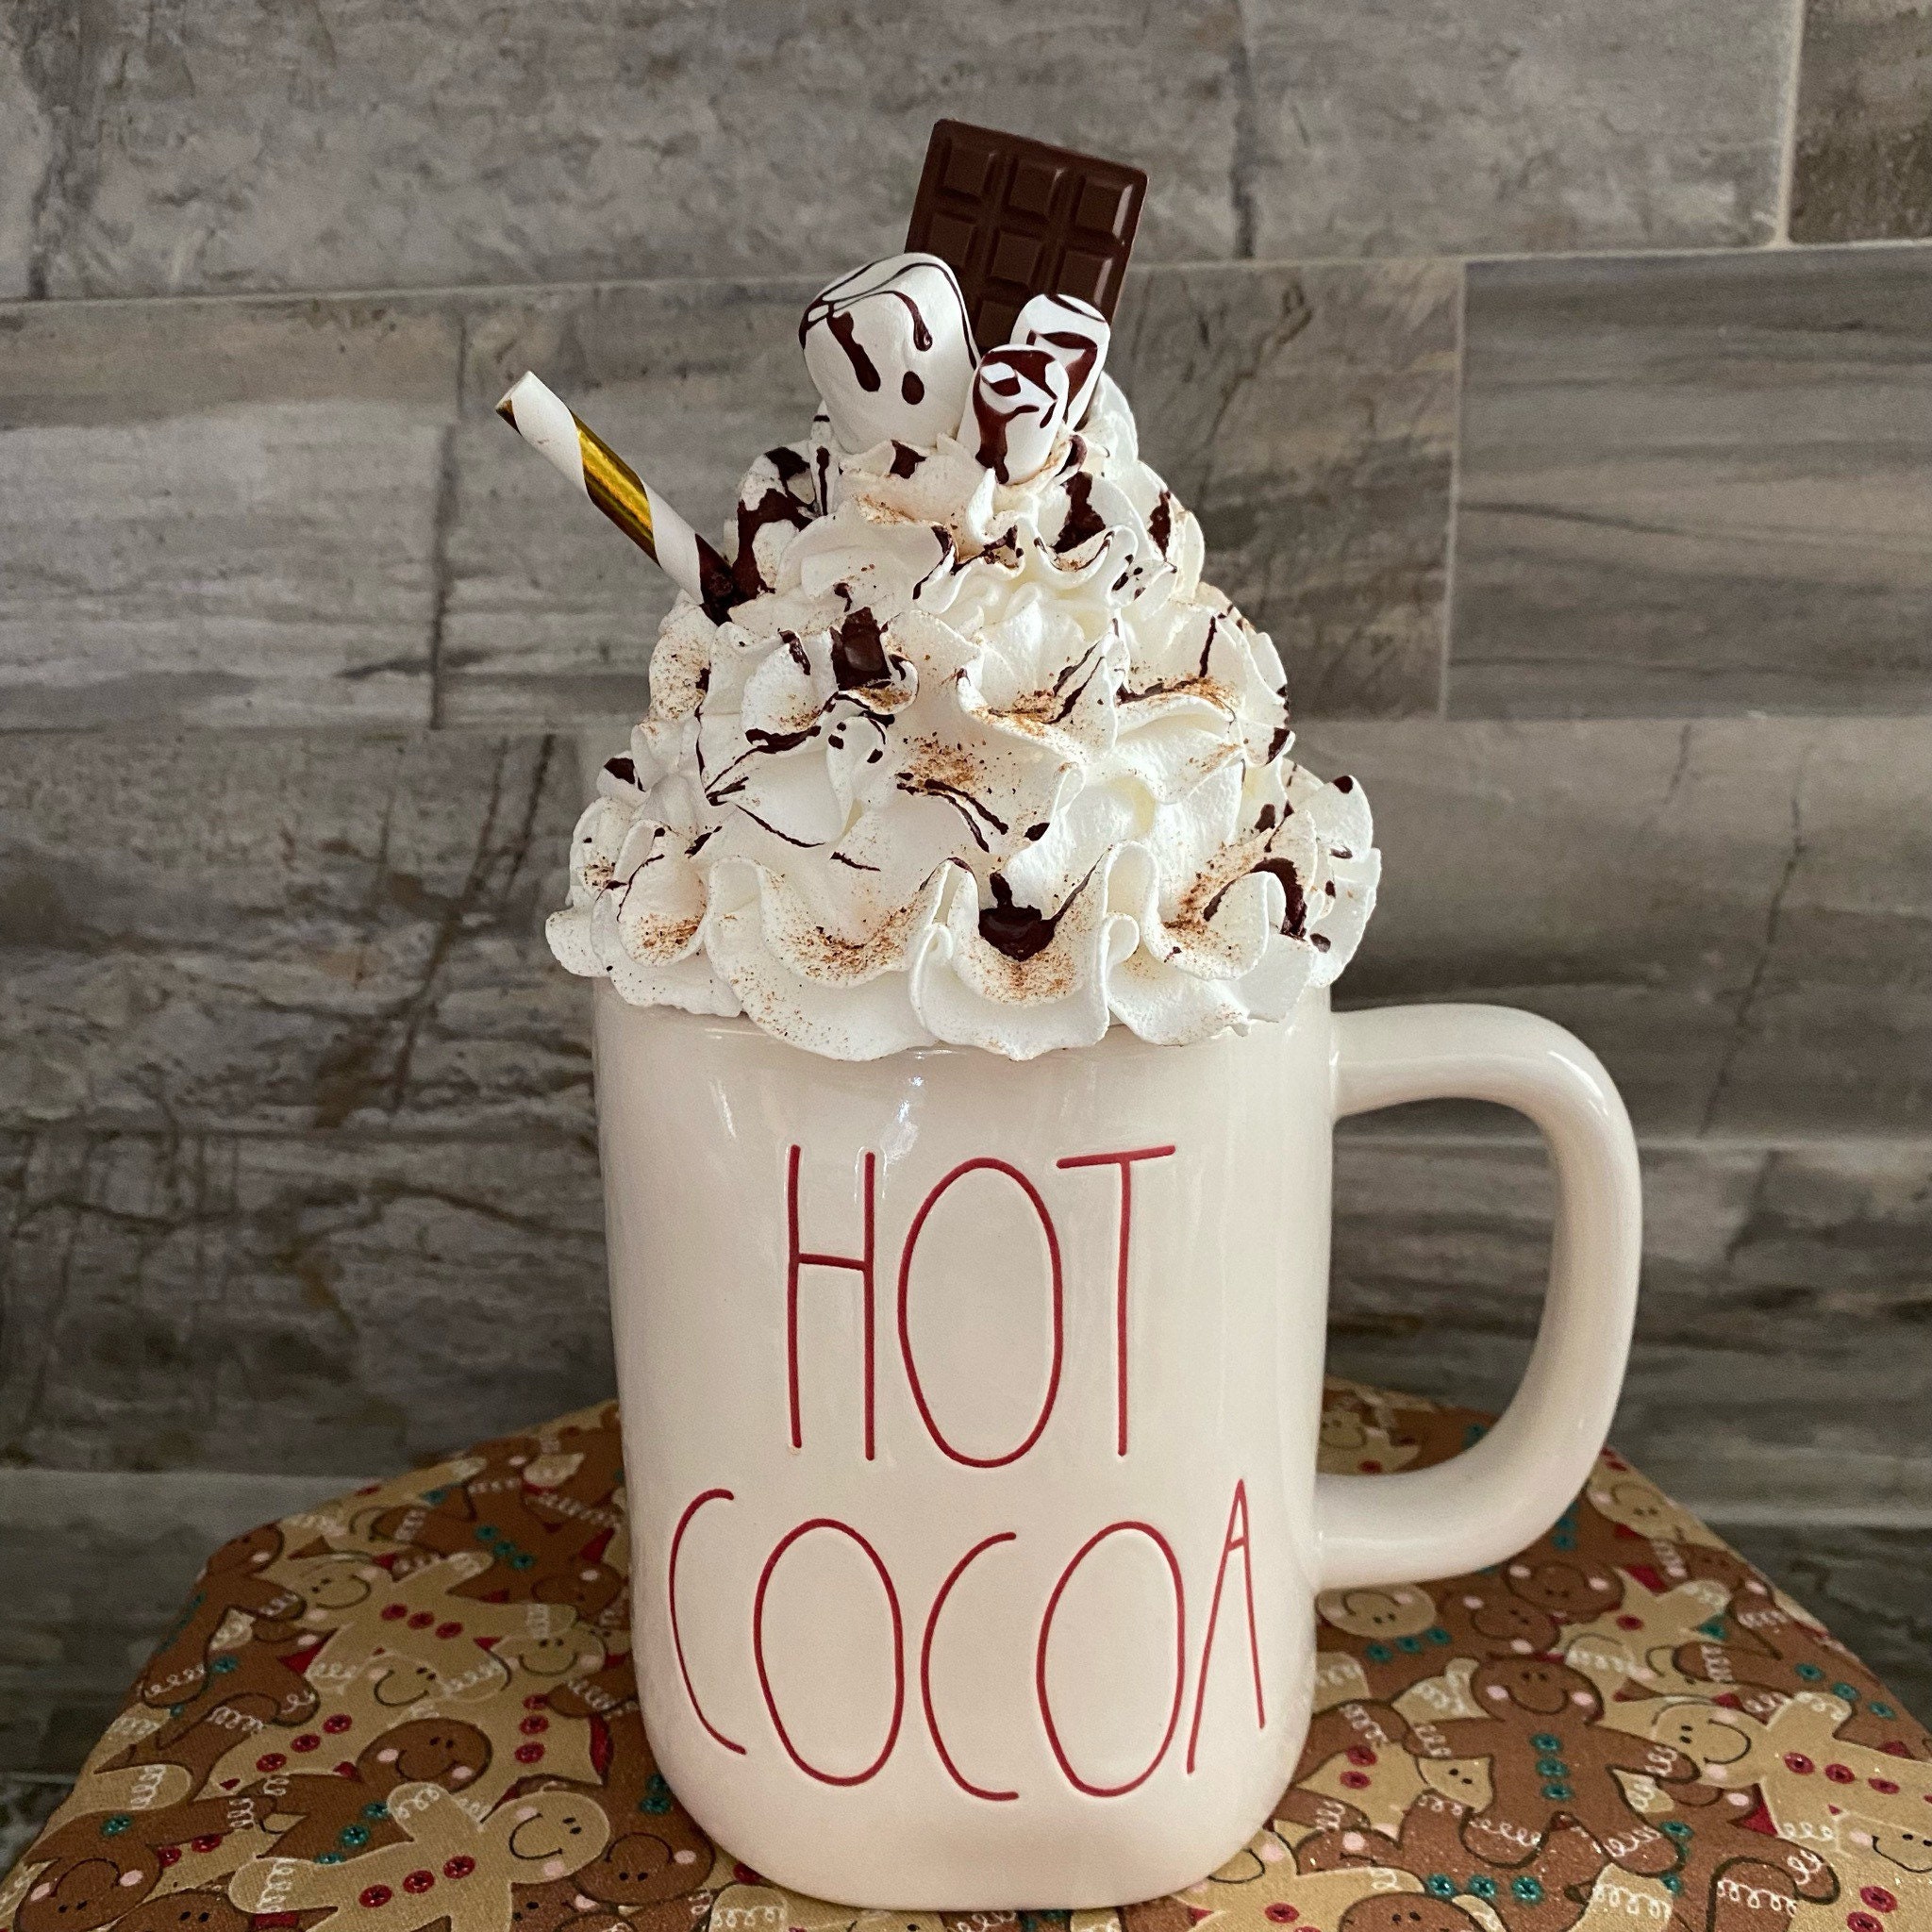 Hot chocolate mug toppers. Place onto your mug of hot chocolate and wait as  they gradually melt to add yummy lusciousness ! Available in…